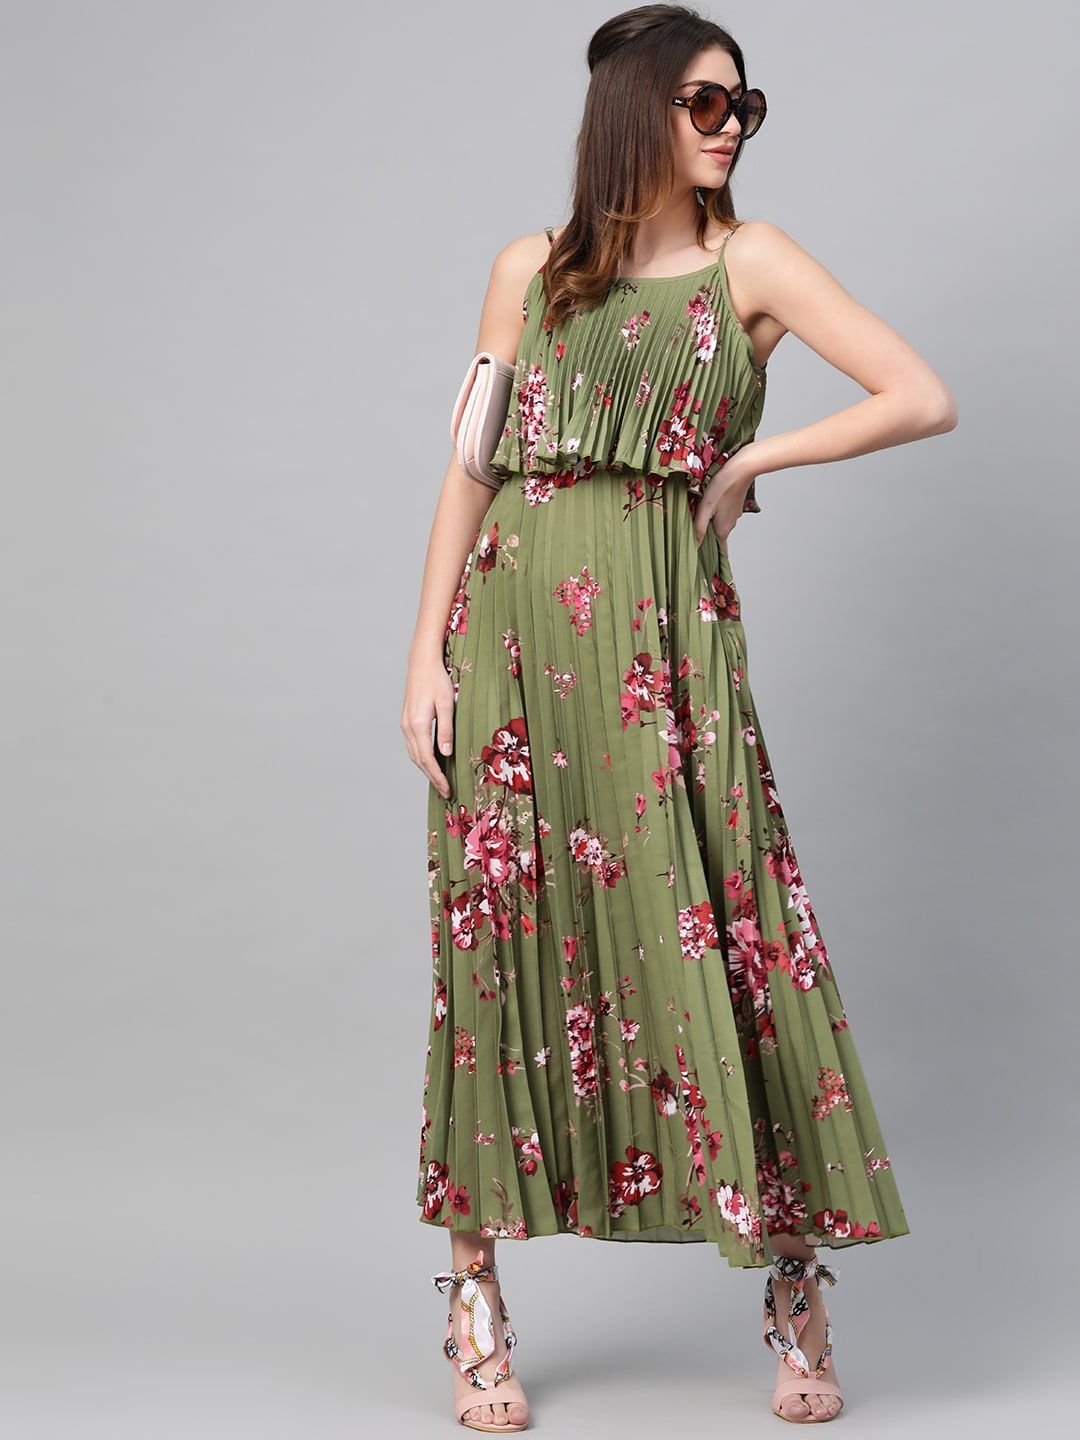 SASSAFRAS Olive Green & Pink Accordion Pleat Printed Maxi Dress Price in India